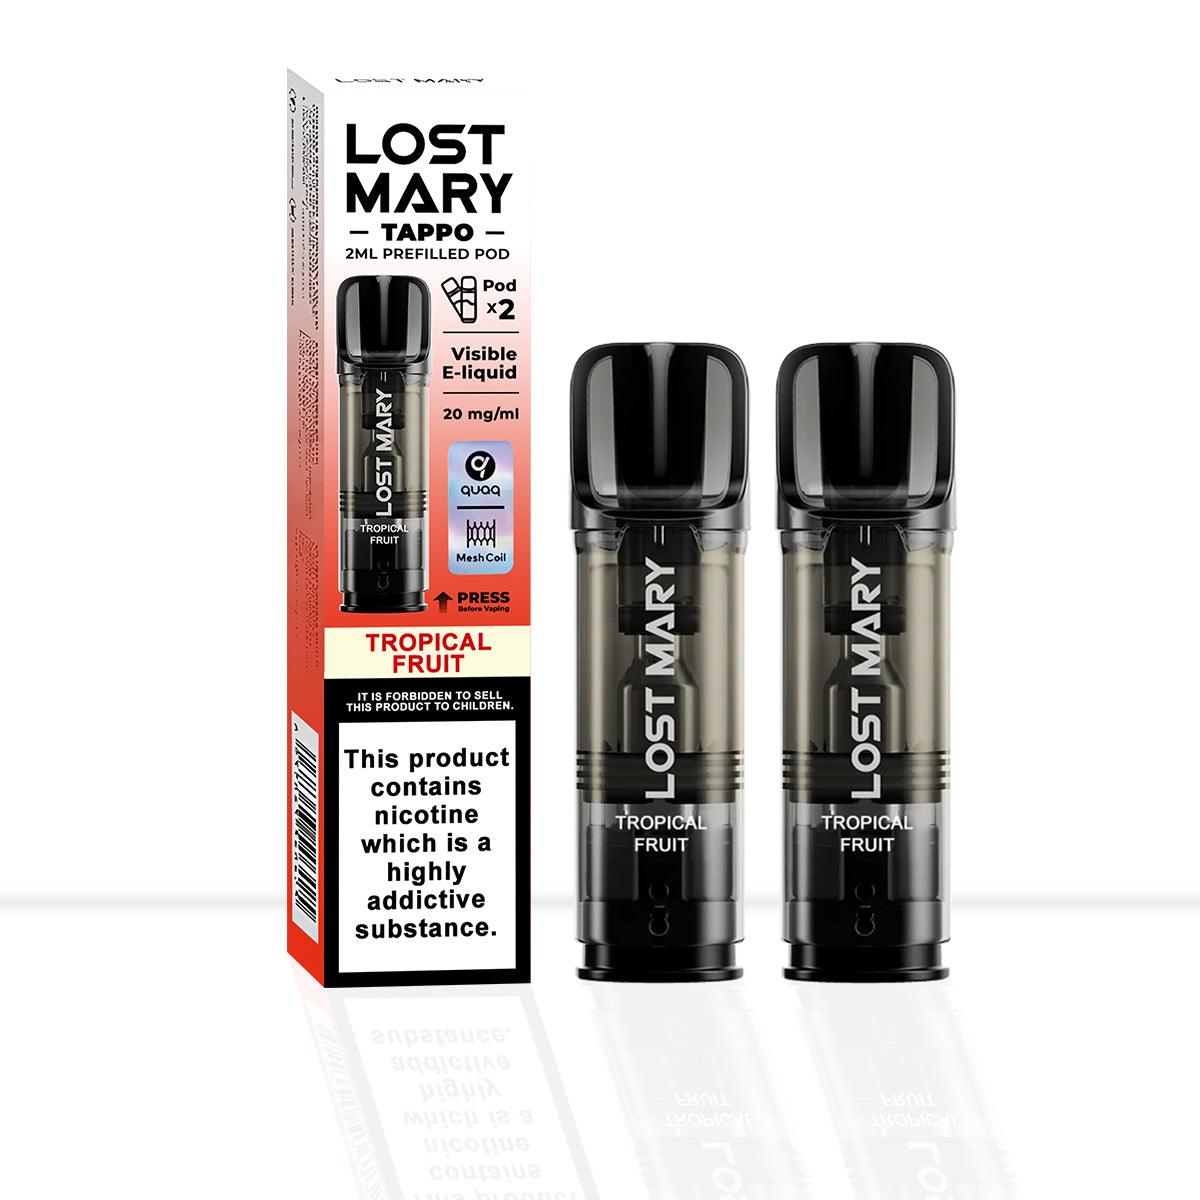 Lost Mary Tappo Tropical Fruit Vape Pods - Pod & Refills